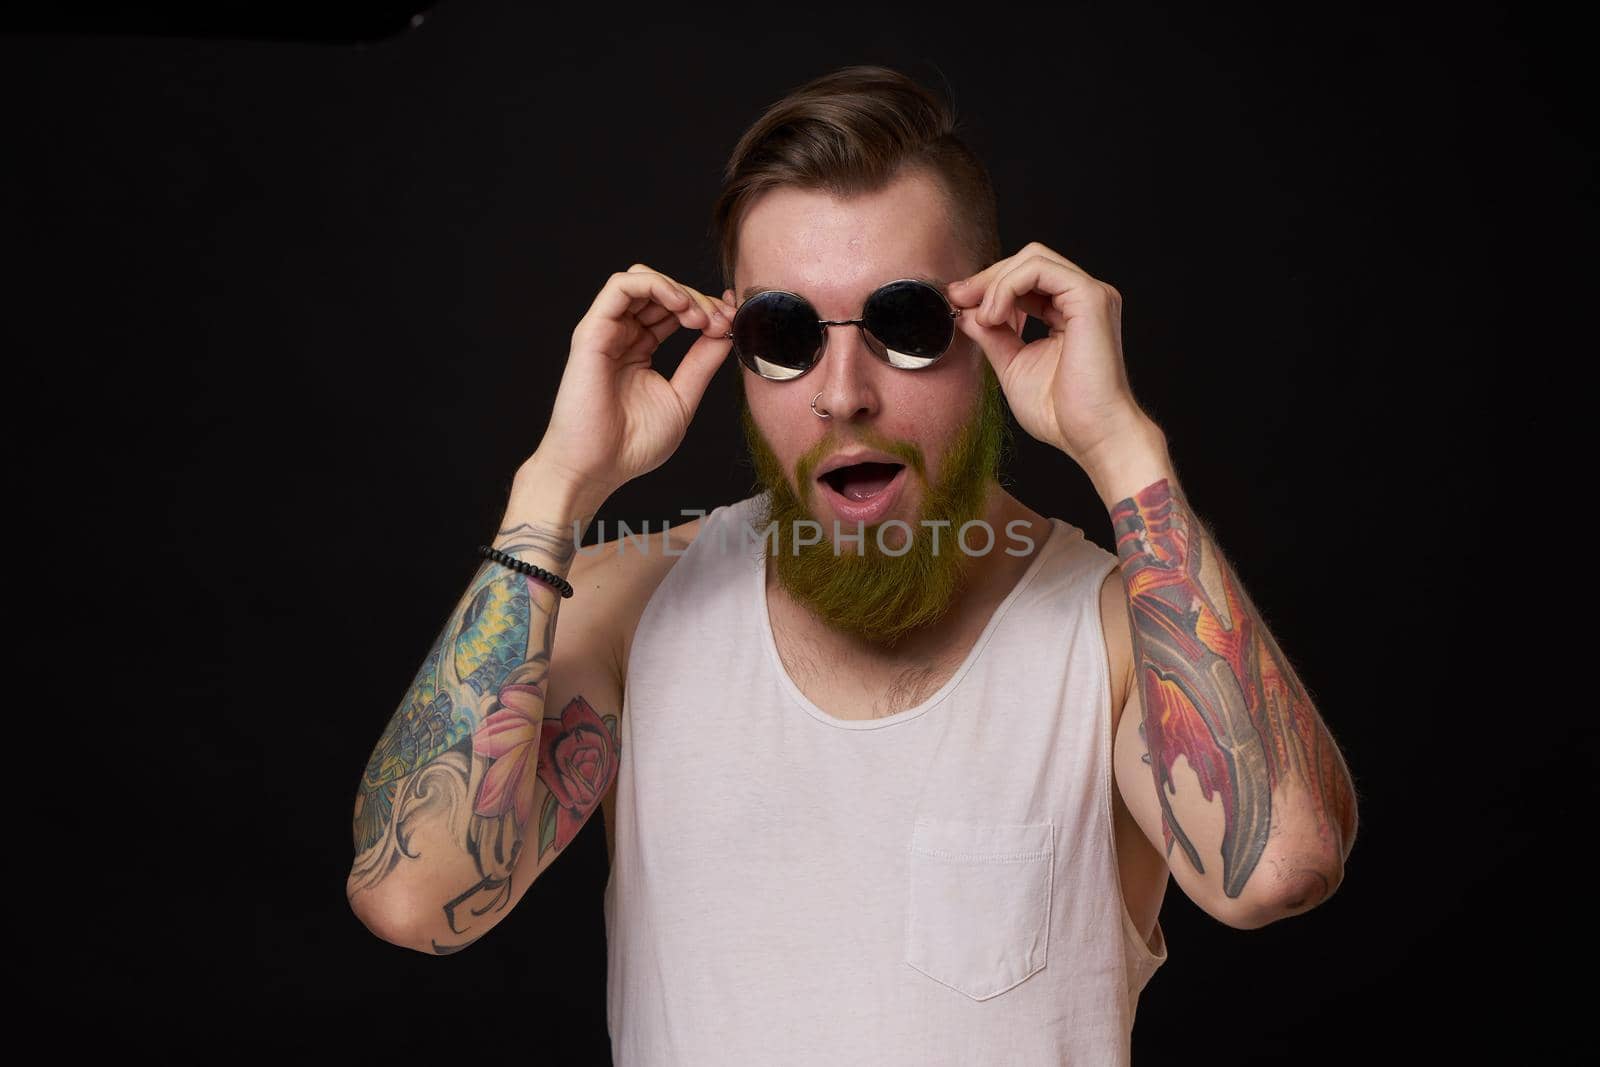 handsome man with tattoos on his arms fashion sunglasses dark background. High quality photo